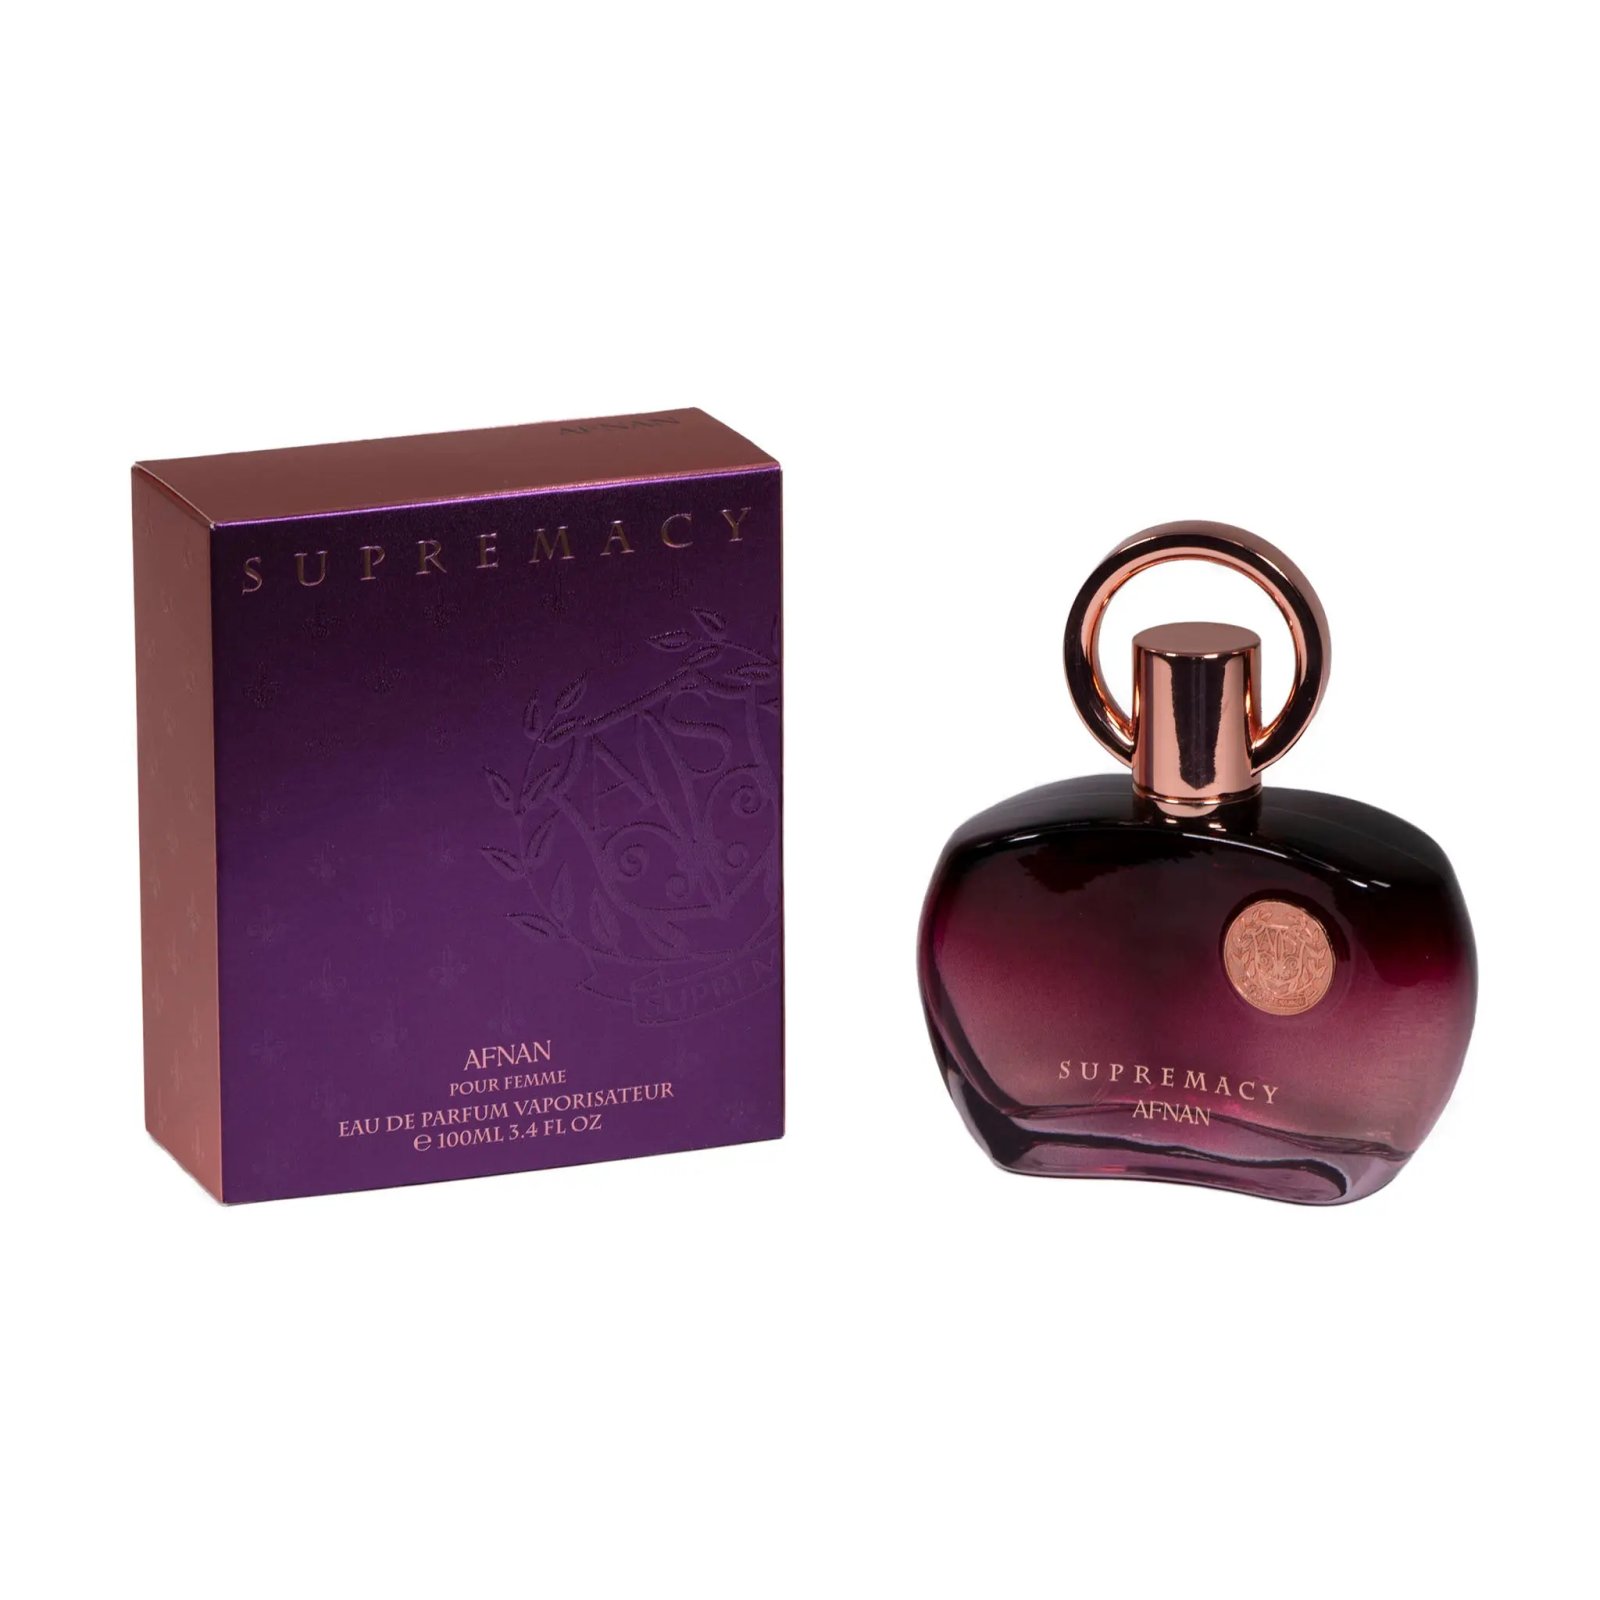 Supremacy Afnan Pour Femme Perfume In Pakistan